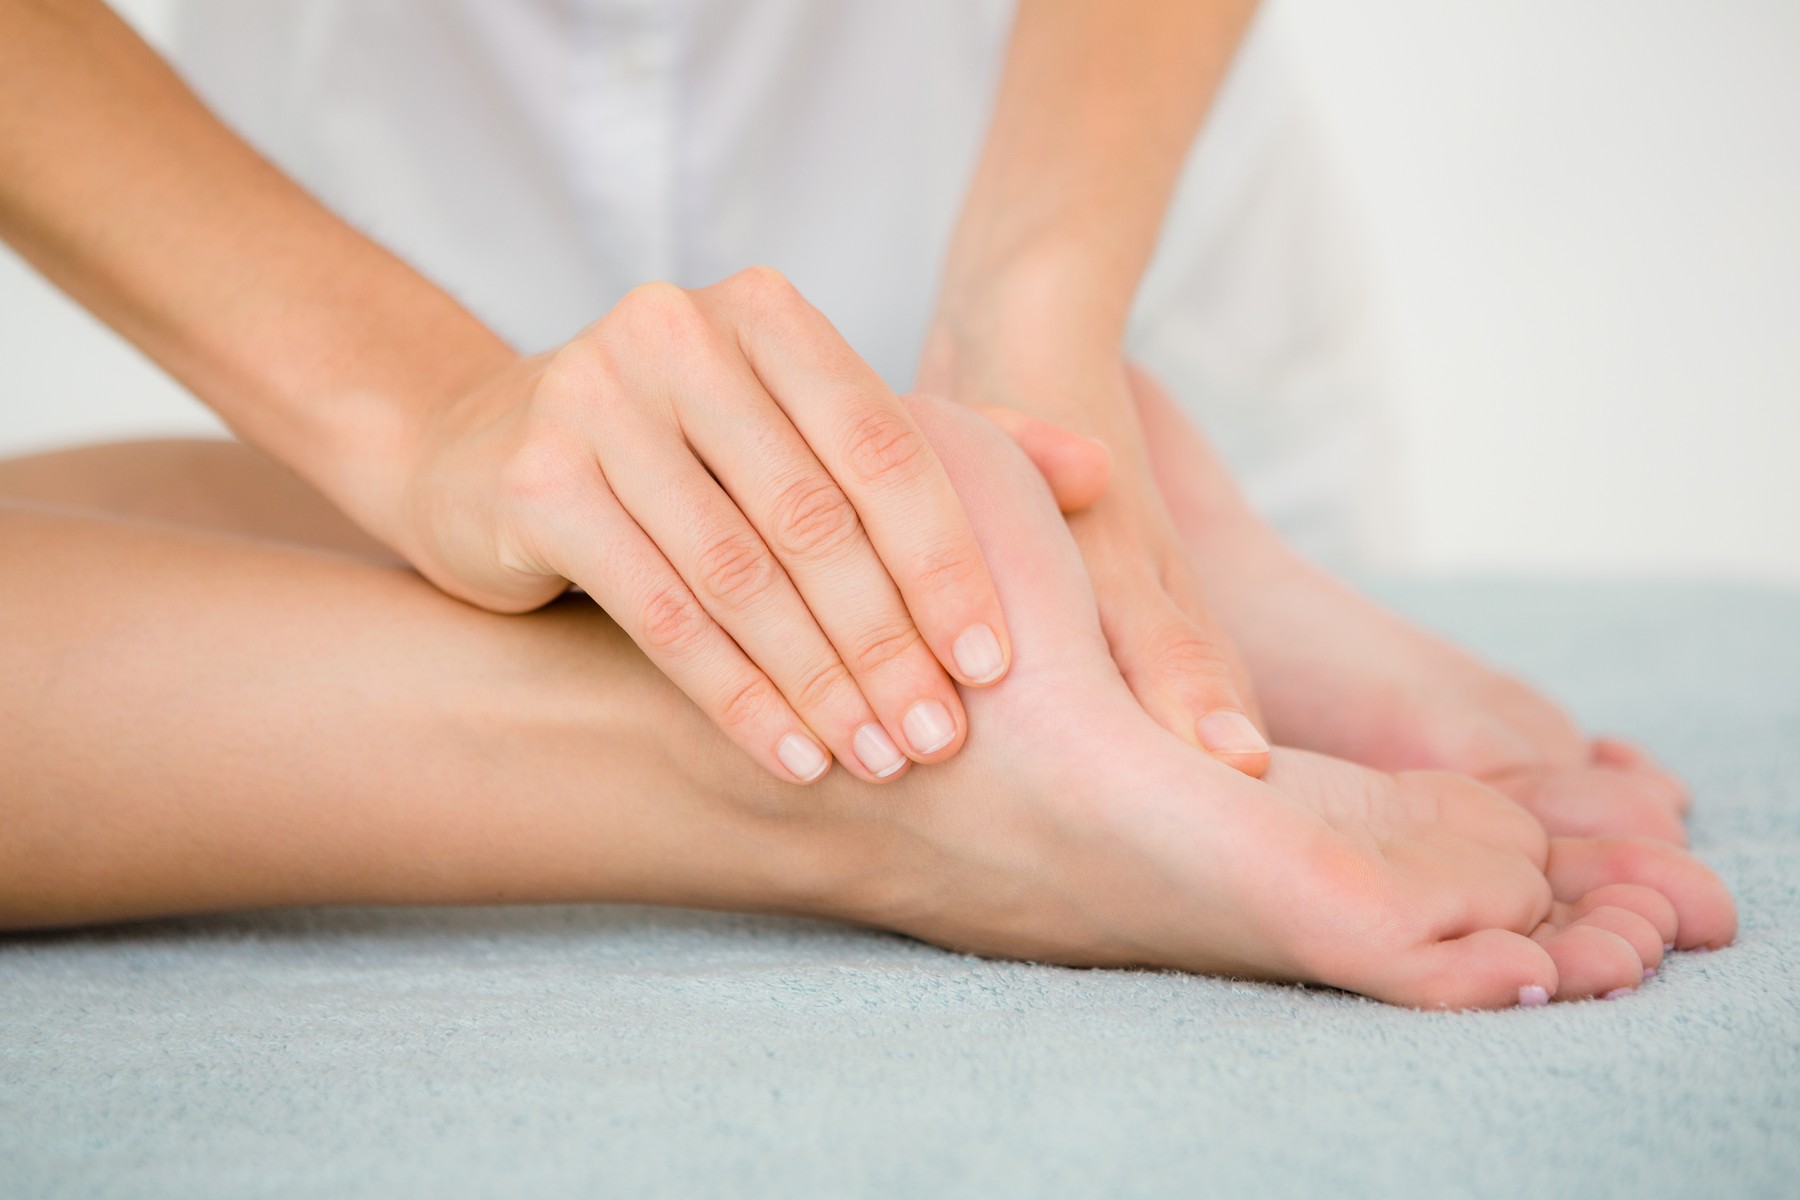 Plantar Fasciitis Treatments You Can Do At Home For Heel Pain! -  iSaveA2Z.com